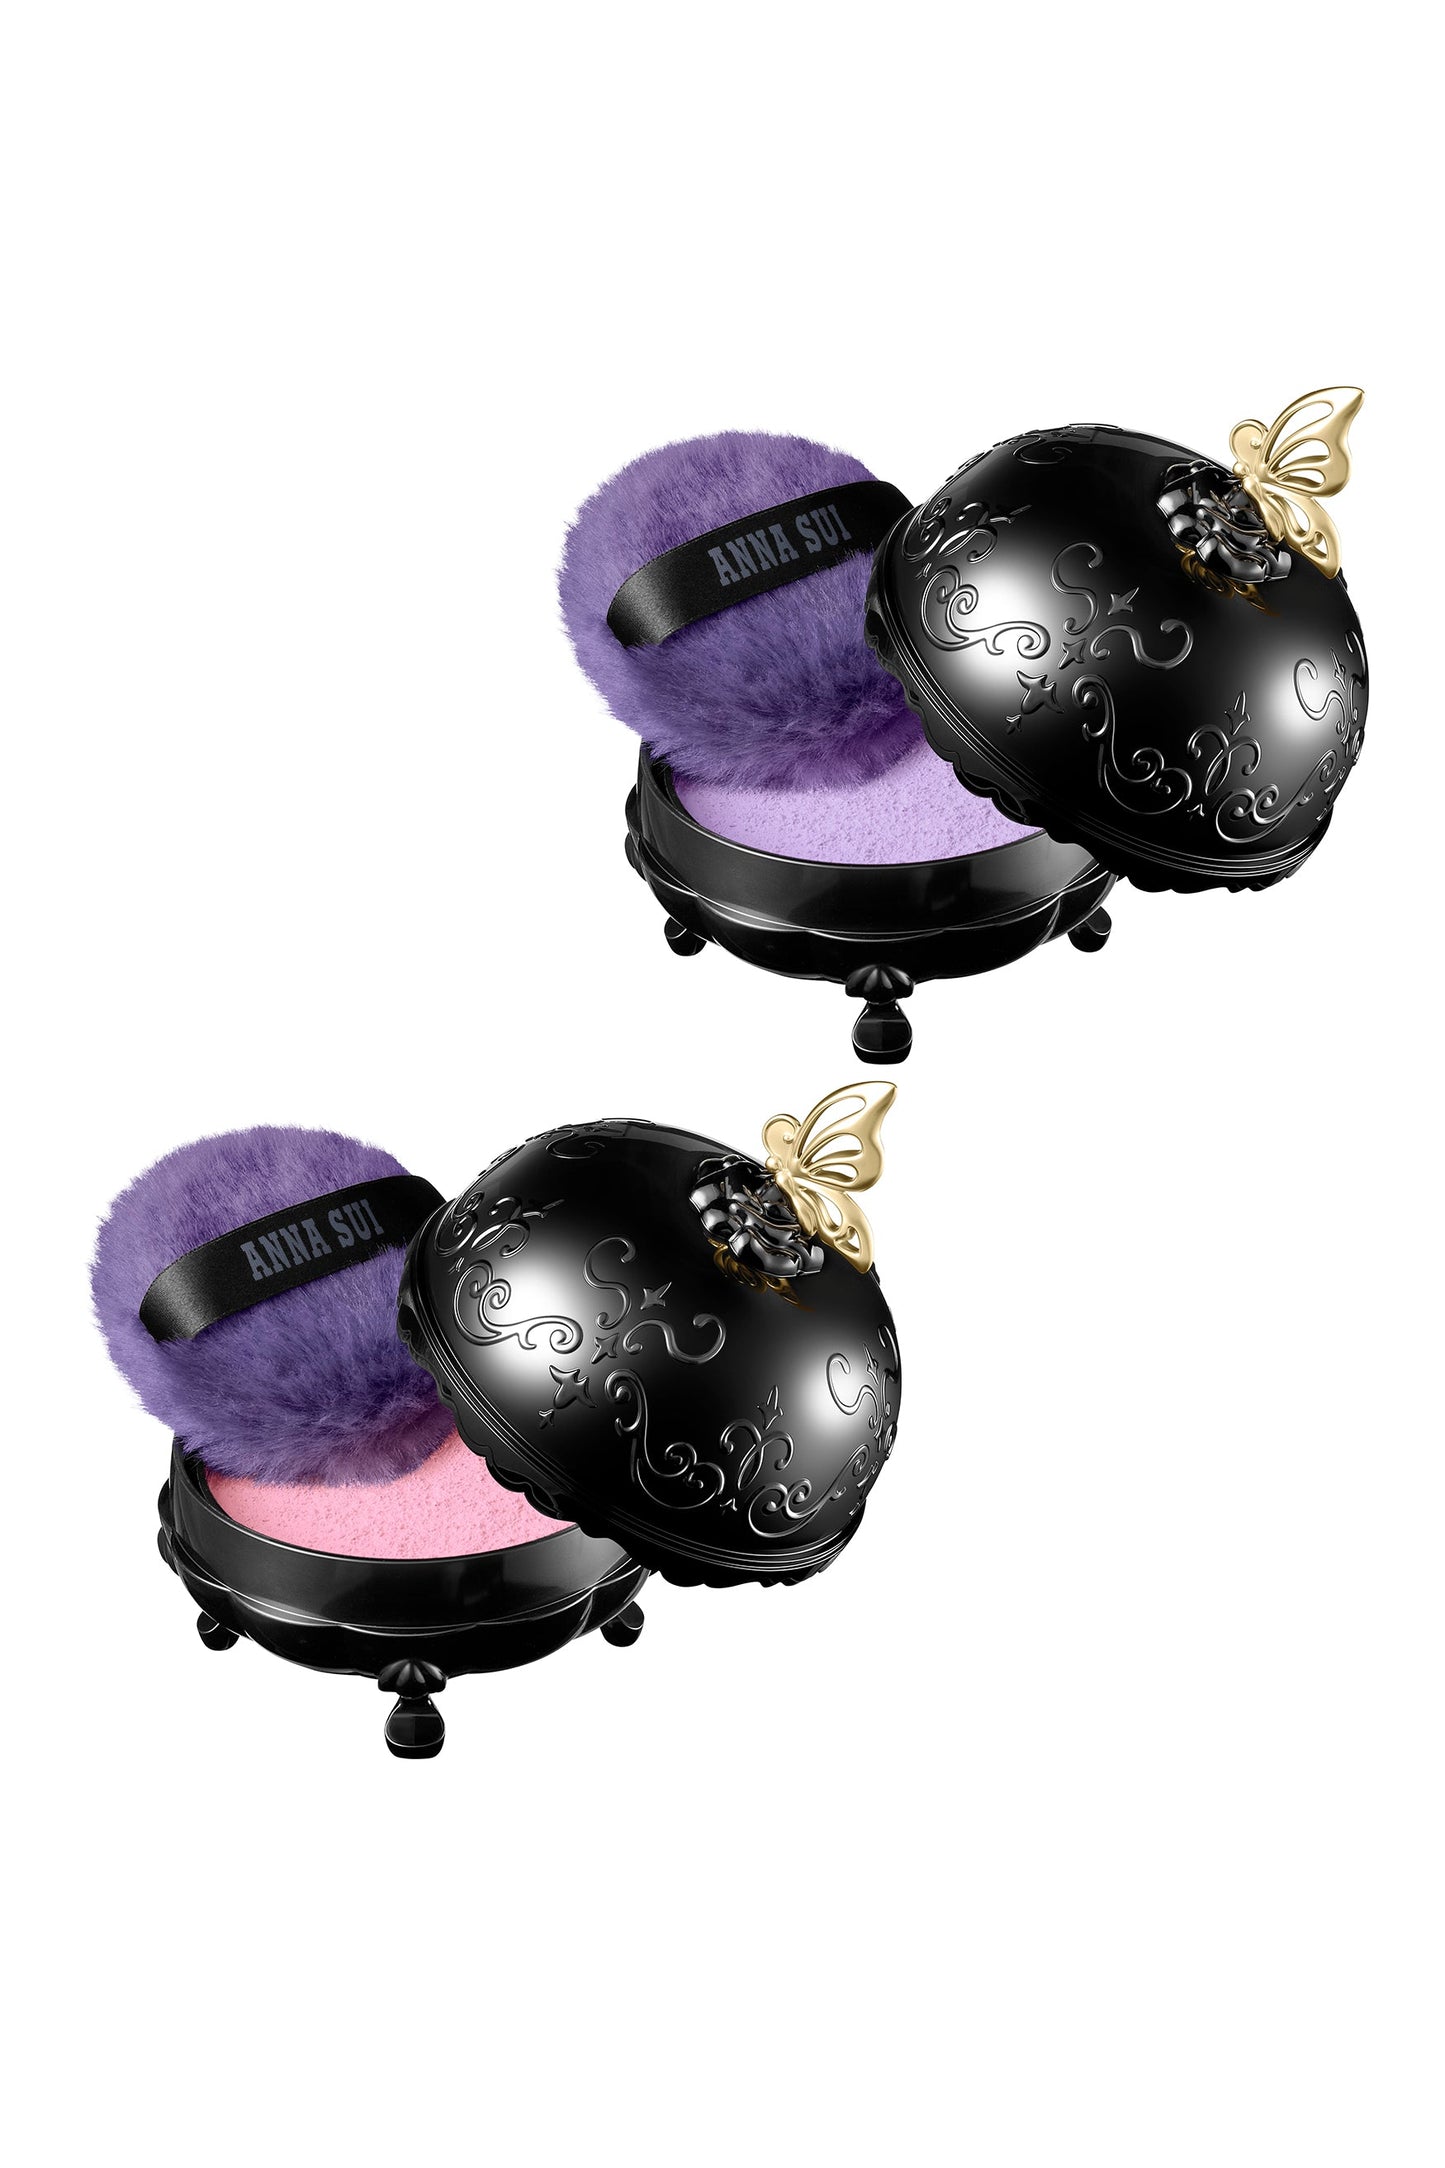 2 Open Face Powder case black classic Anna Sui with purple puff, Powders sold separately